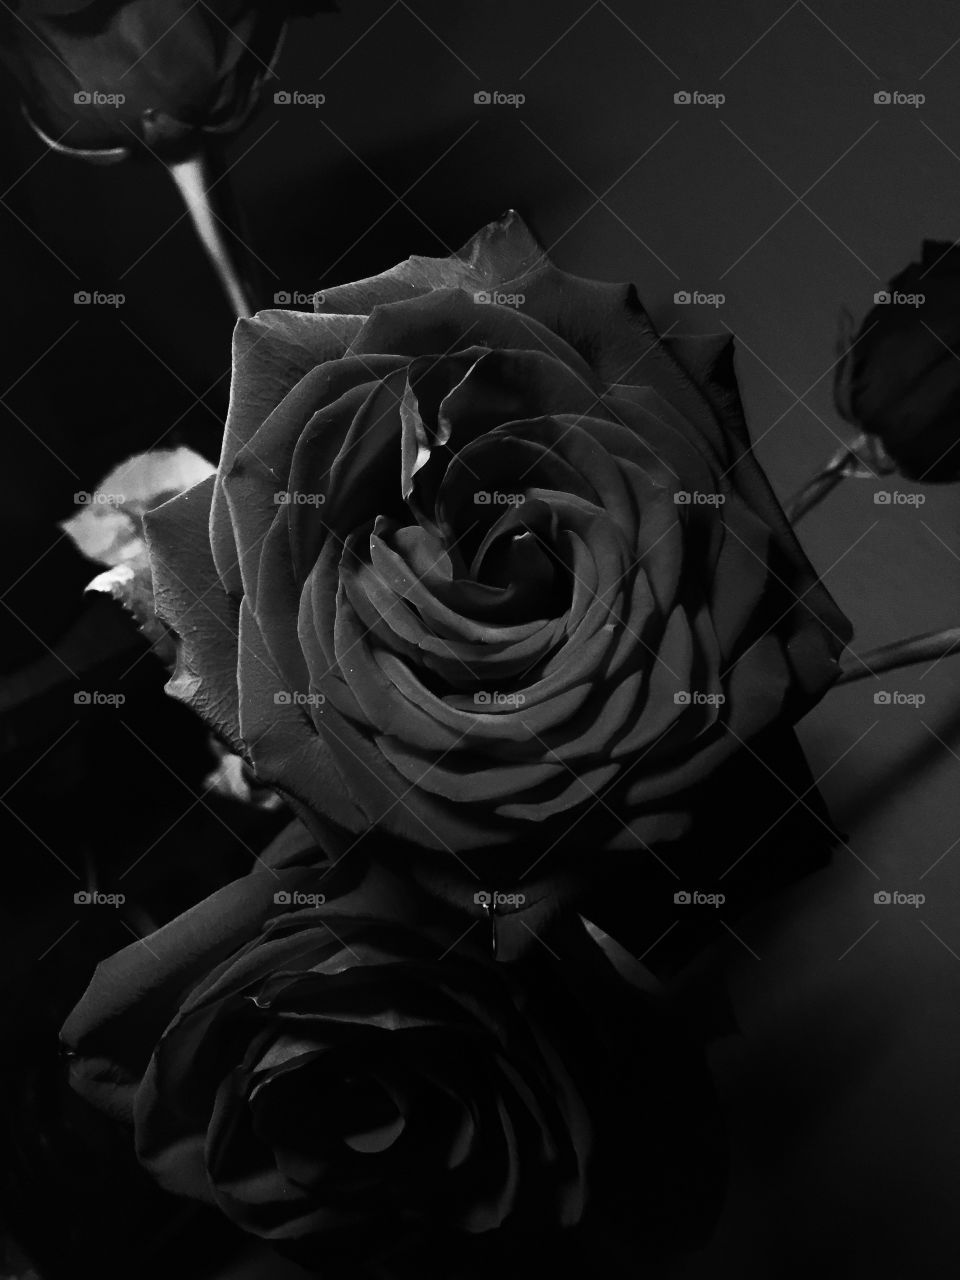 Sad black and white rose as it ages and it’s life comes to an end. A dark background with light overhead gently illuminates the rose and reveals its shadow.